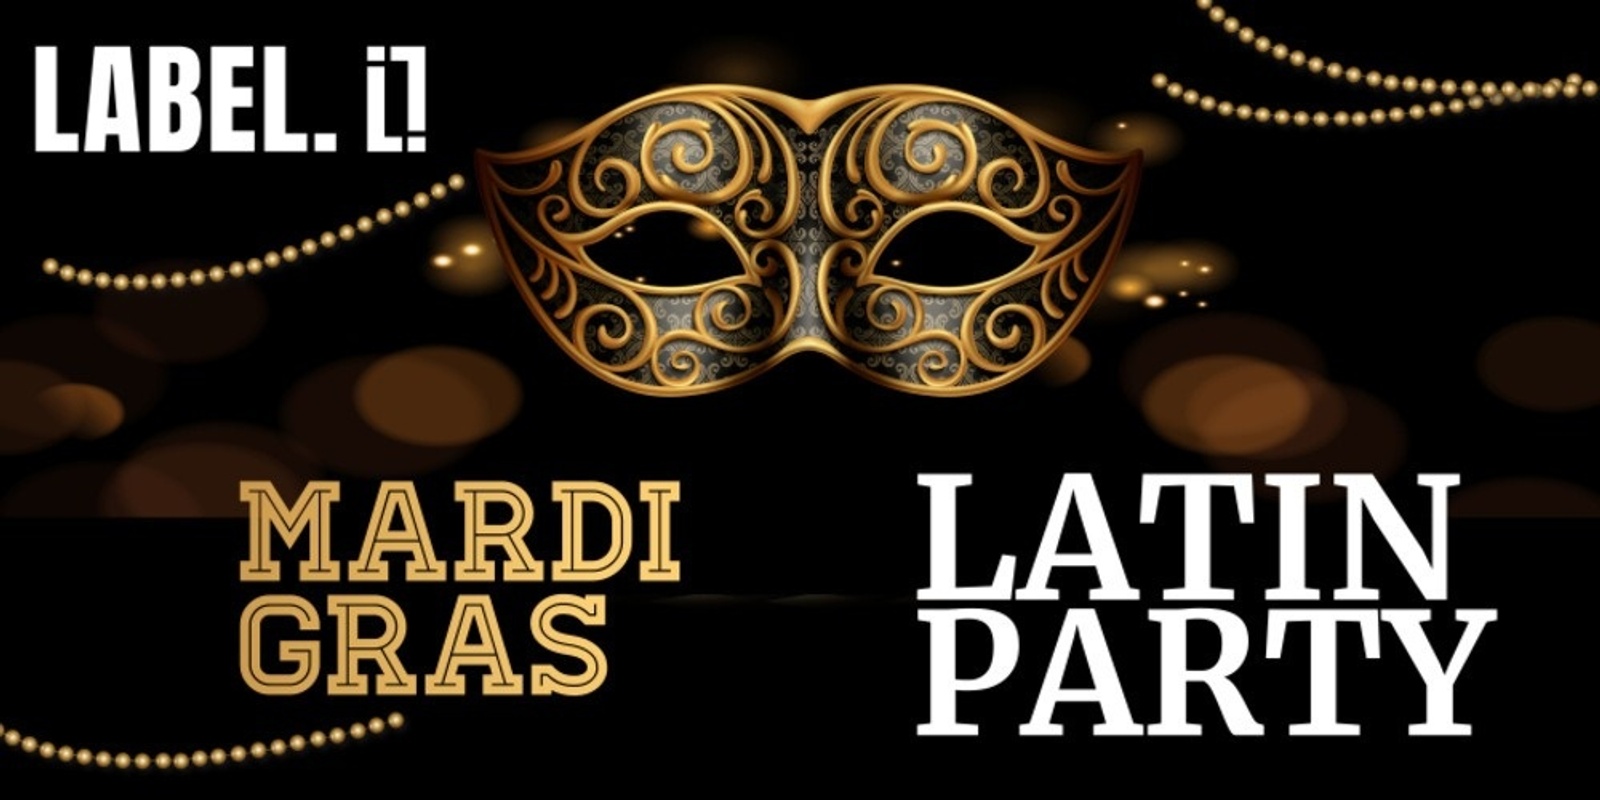 Banner image for Latin Party MARDI GRASS SPECIAL EDITION